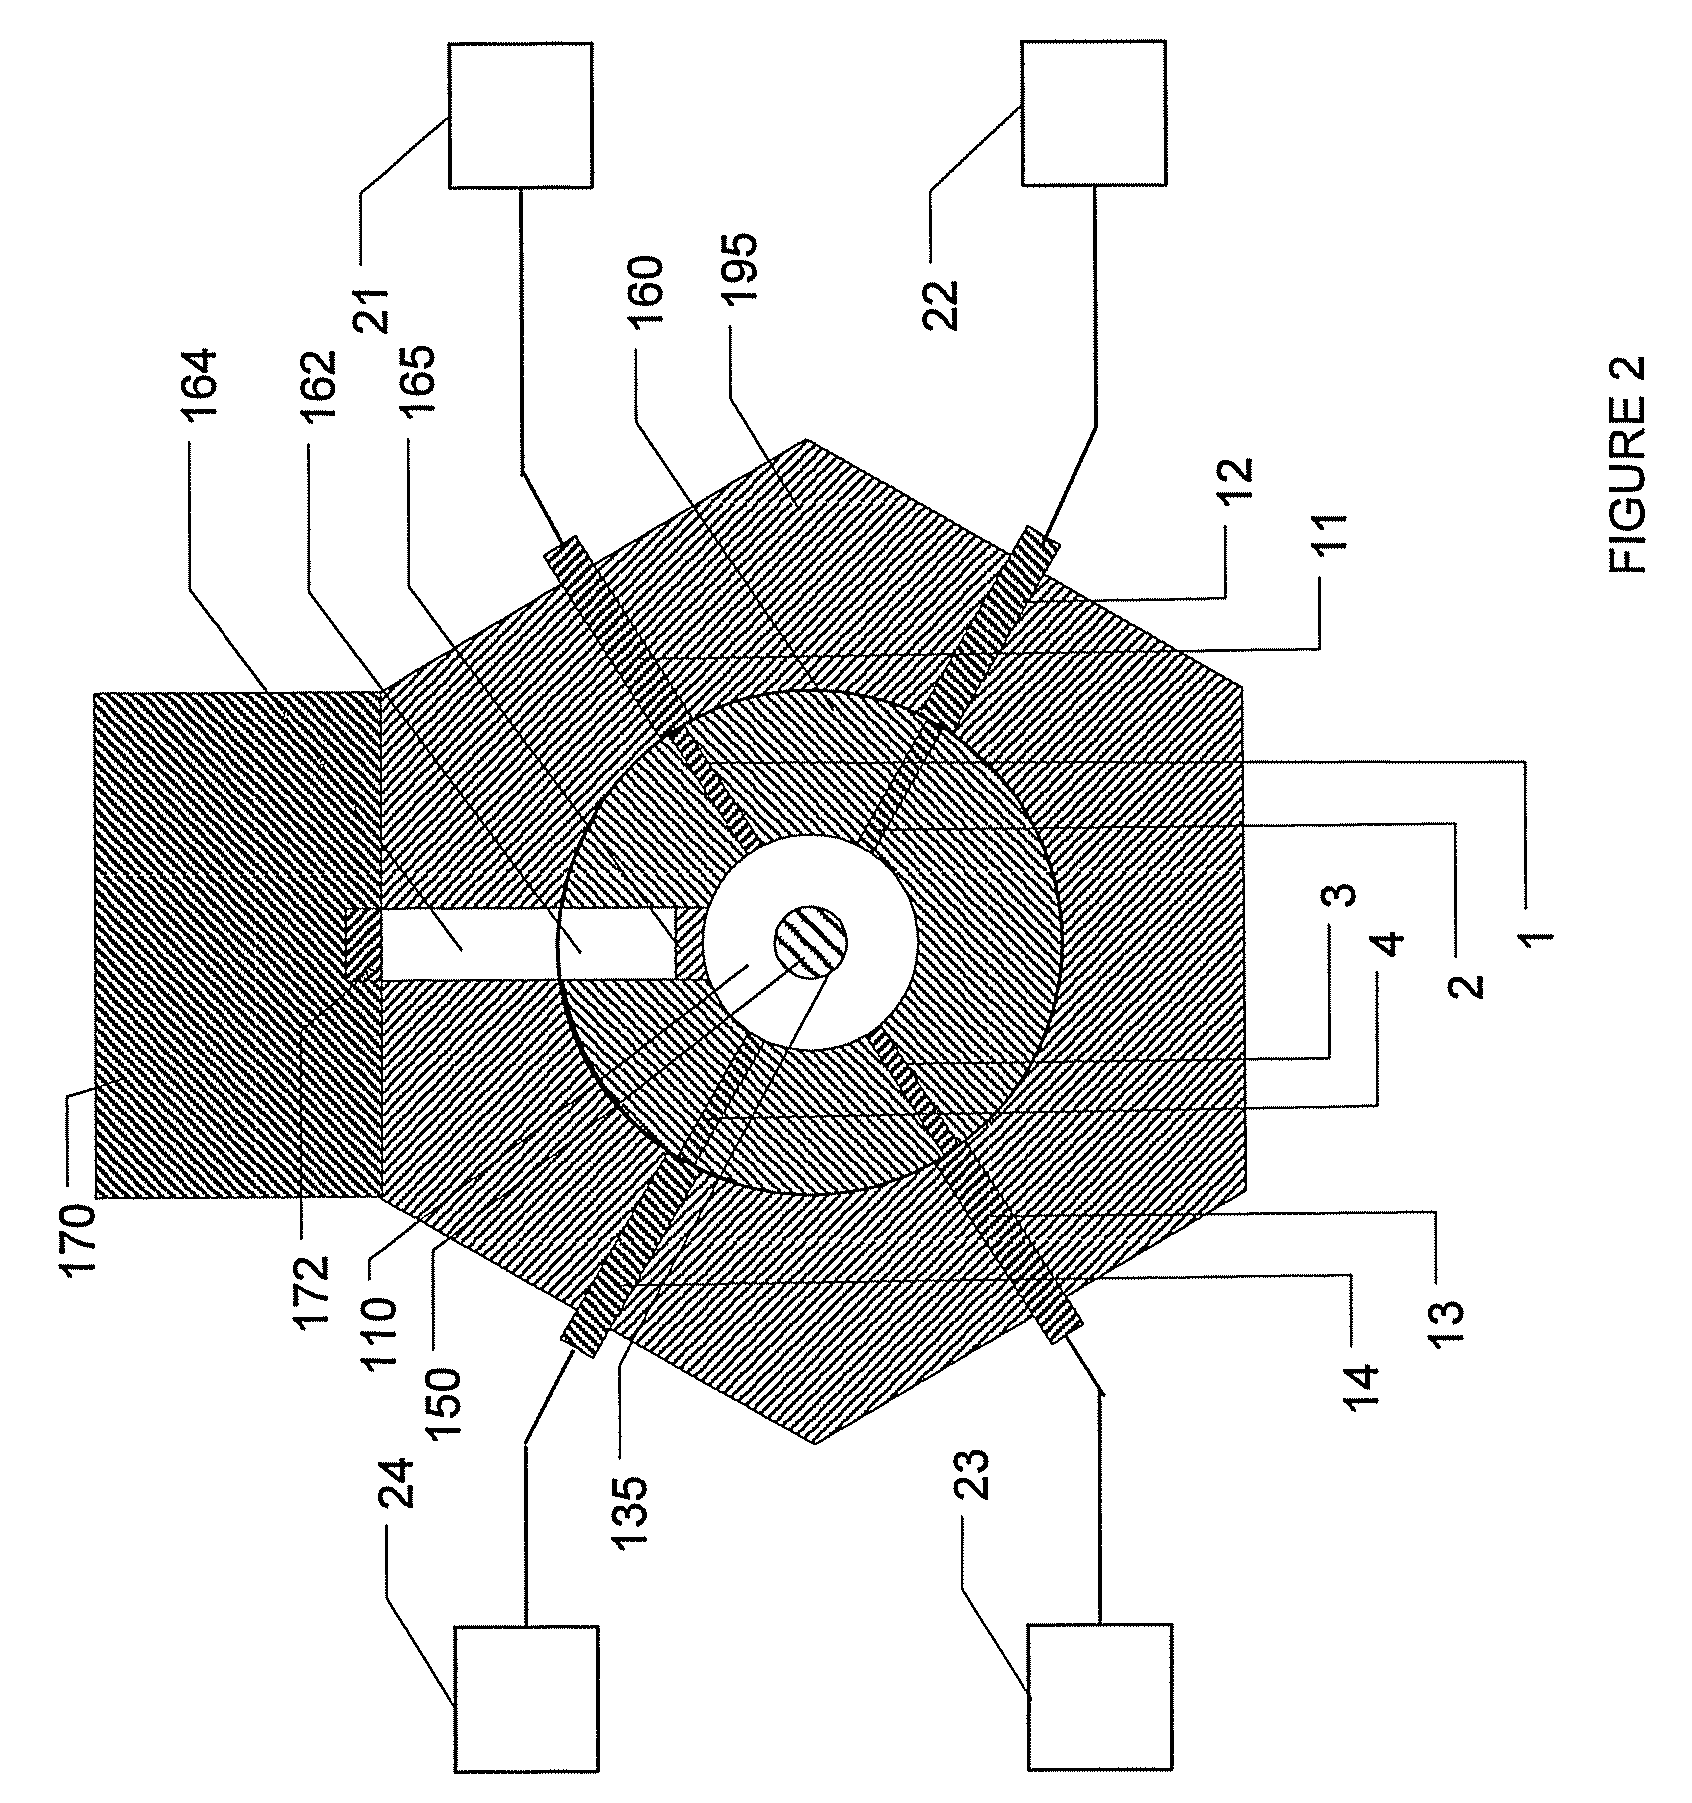 Apparatus for high-accuracy fiber counting in air